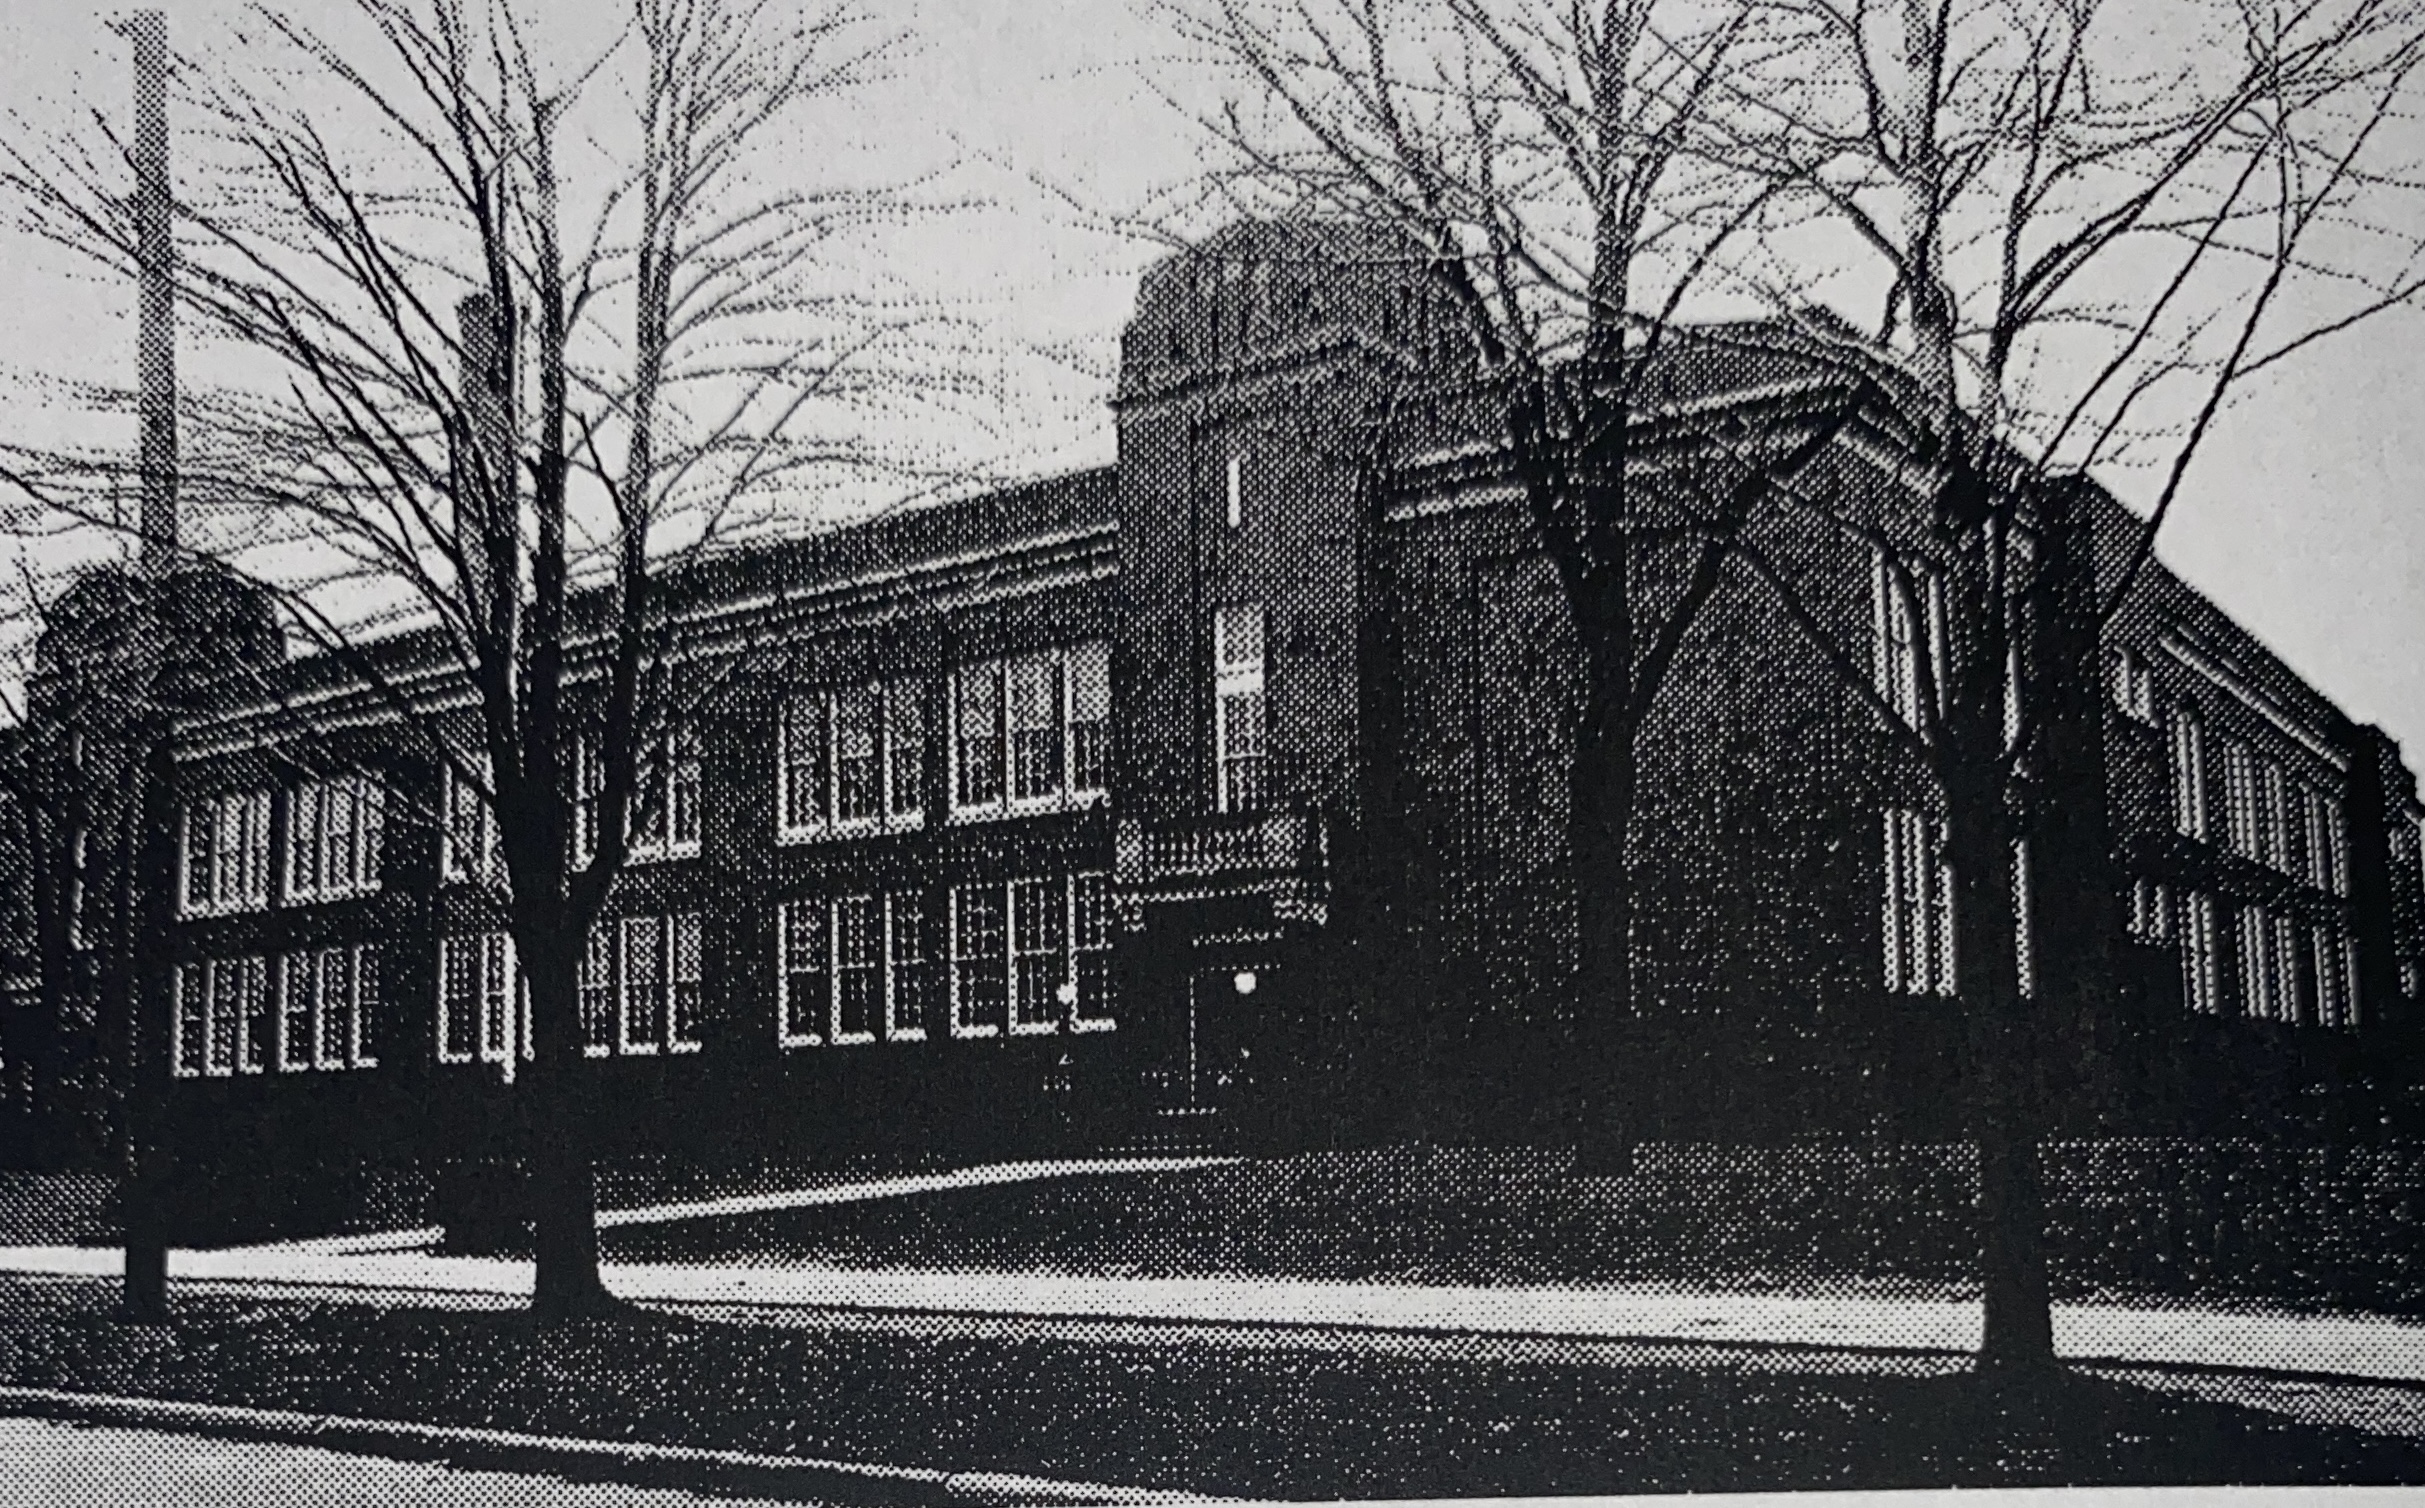 hawthorne school building in black and white